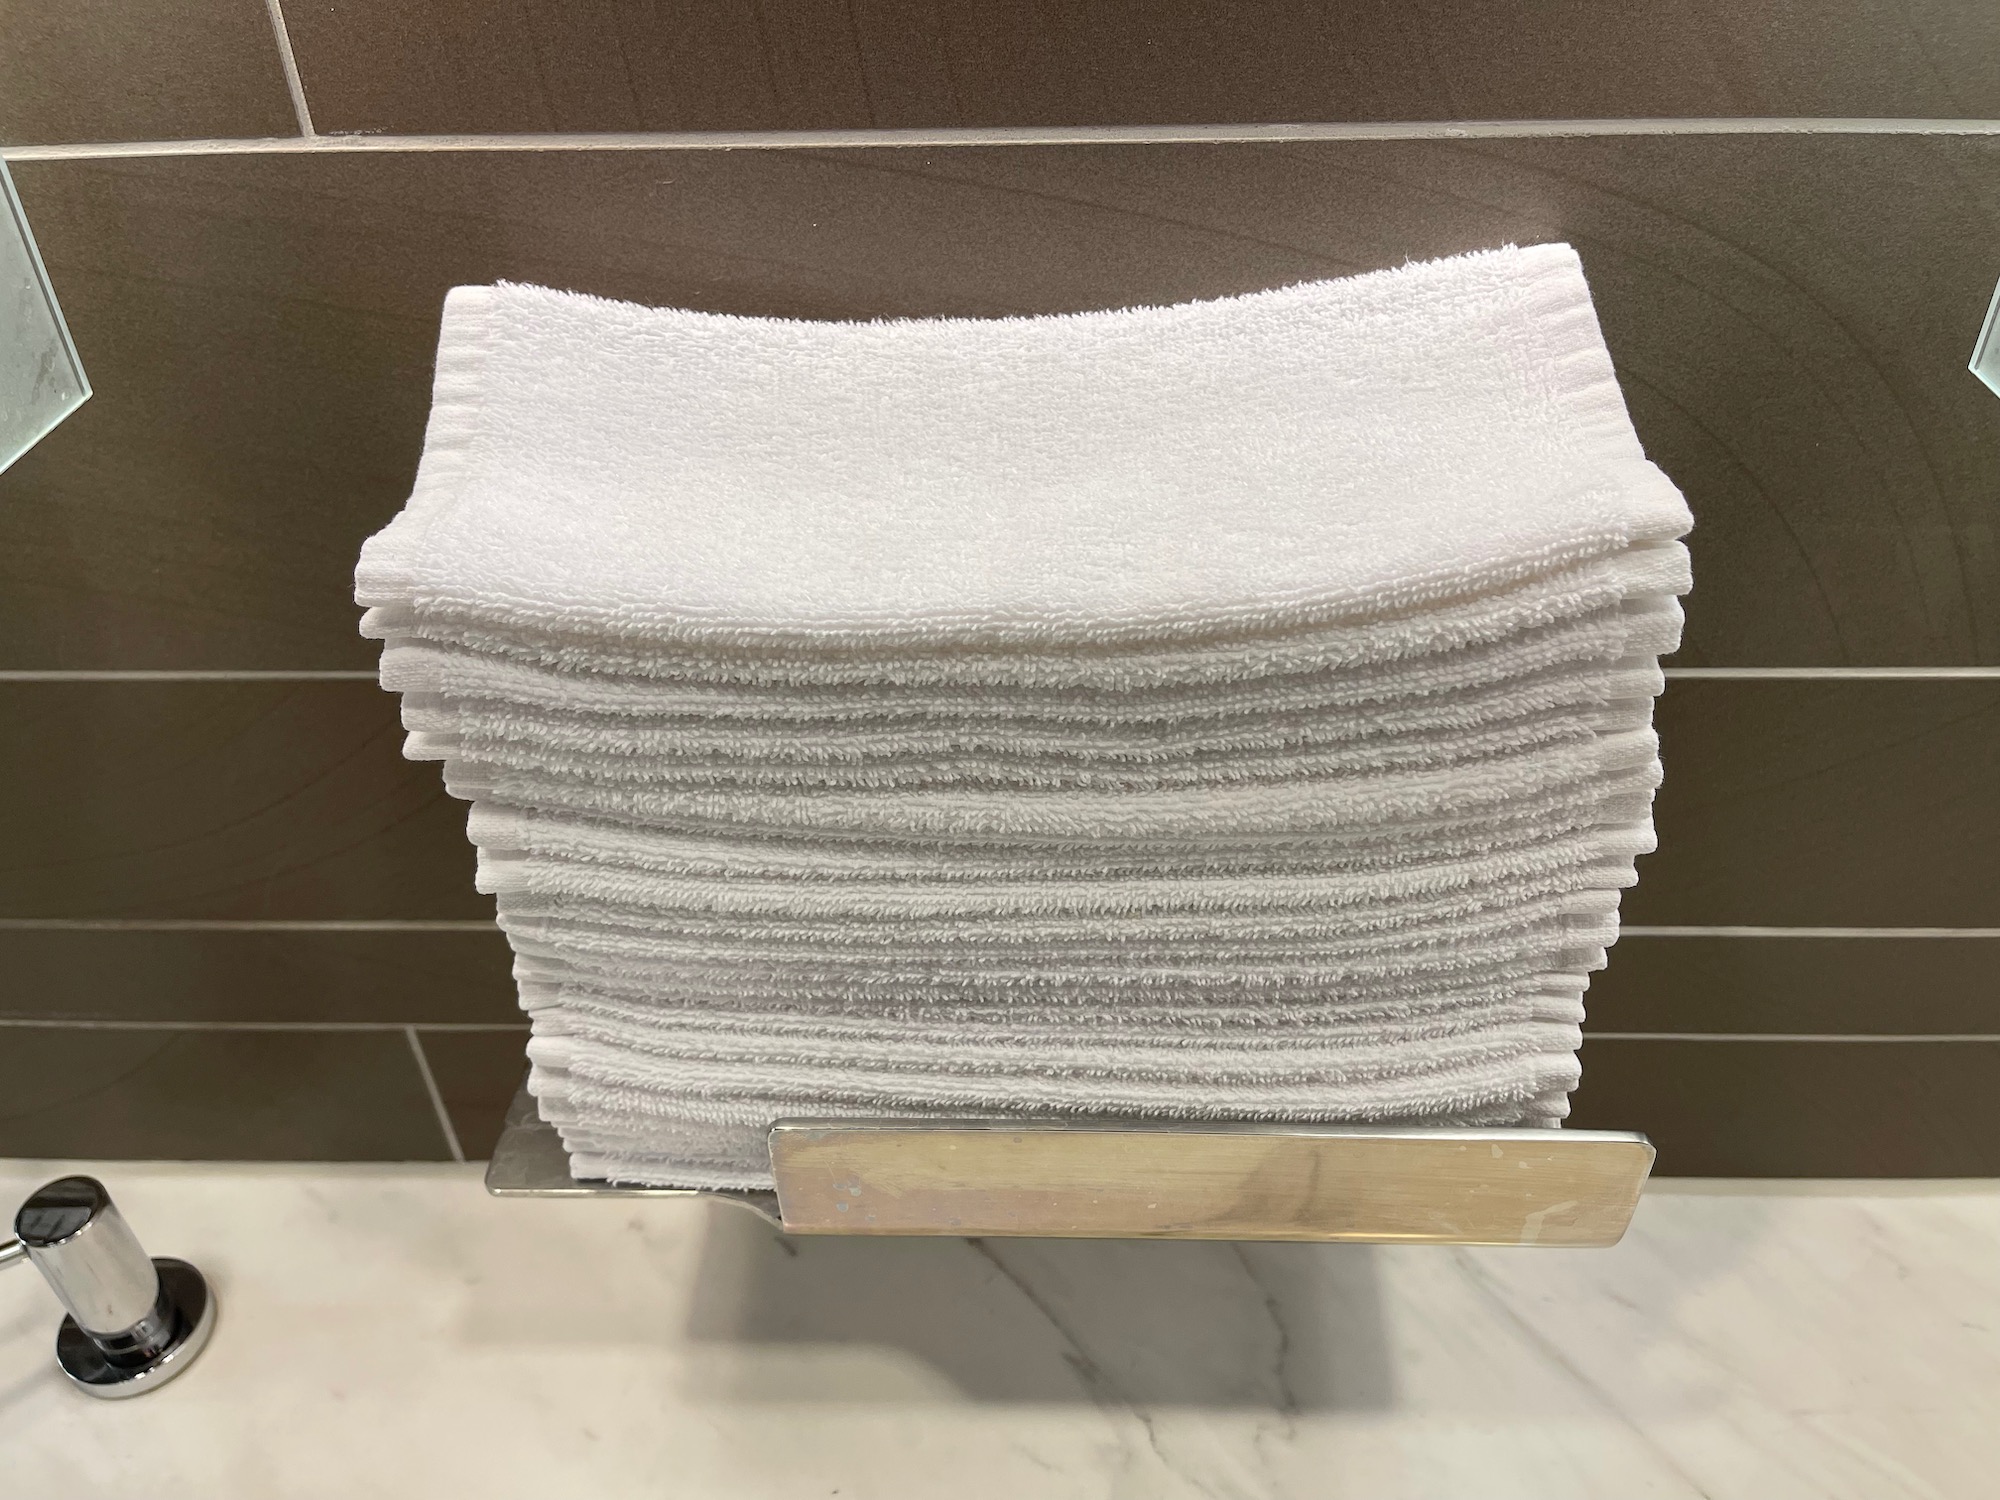 a stack of white towels on a metal holder